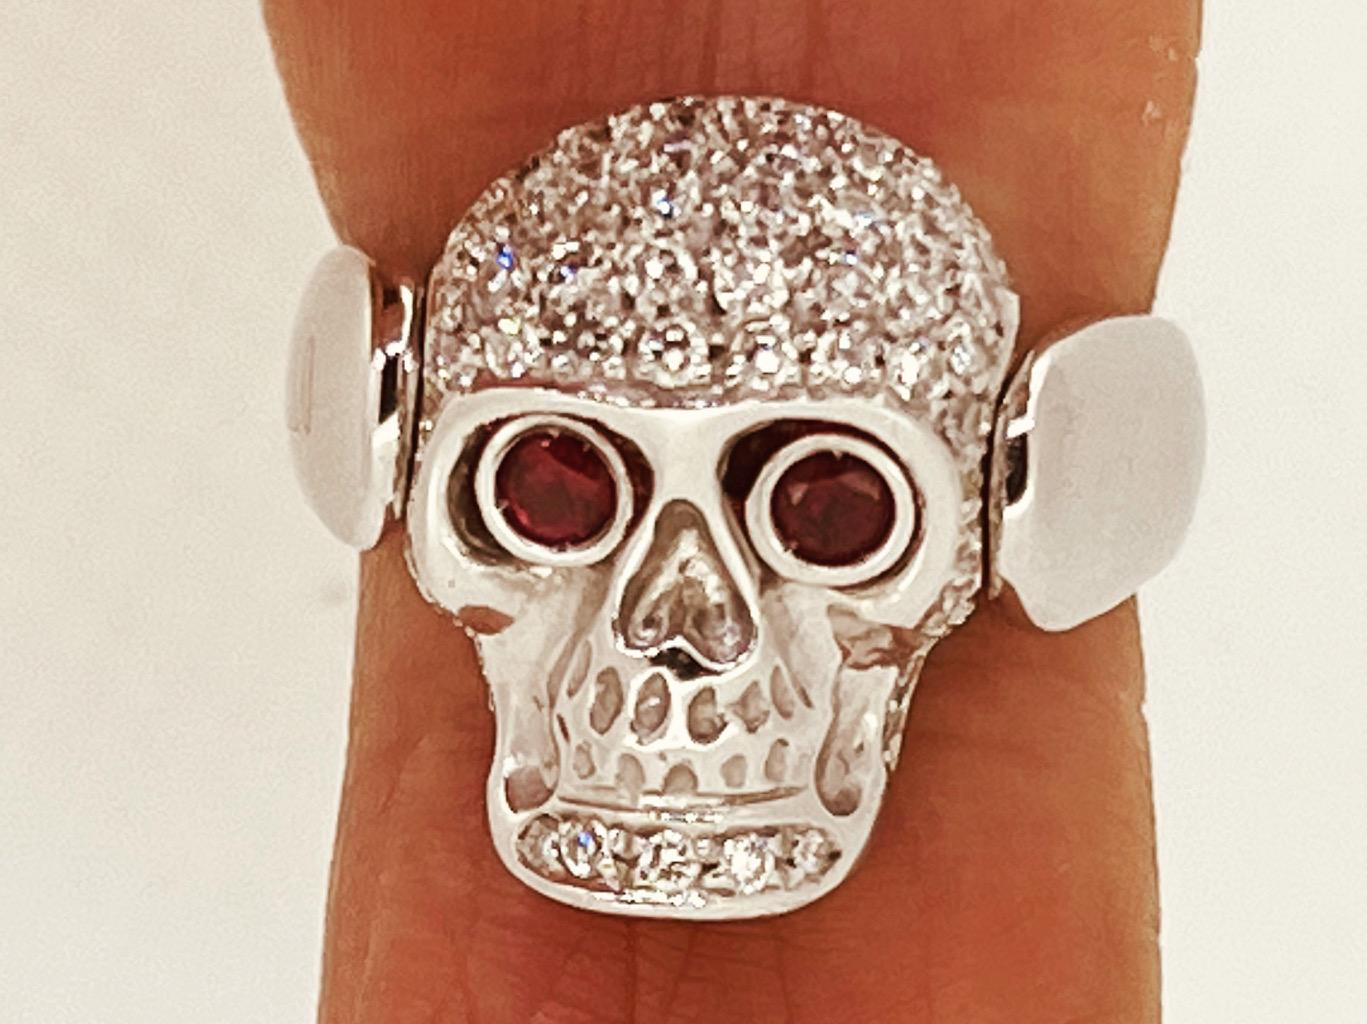 Gavello 18 Carat White Gold and 0.7 Carat Diamond Skull Ring with Ruby Eyes In Excellent Condition For Sale In London, GB